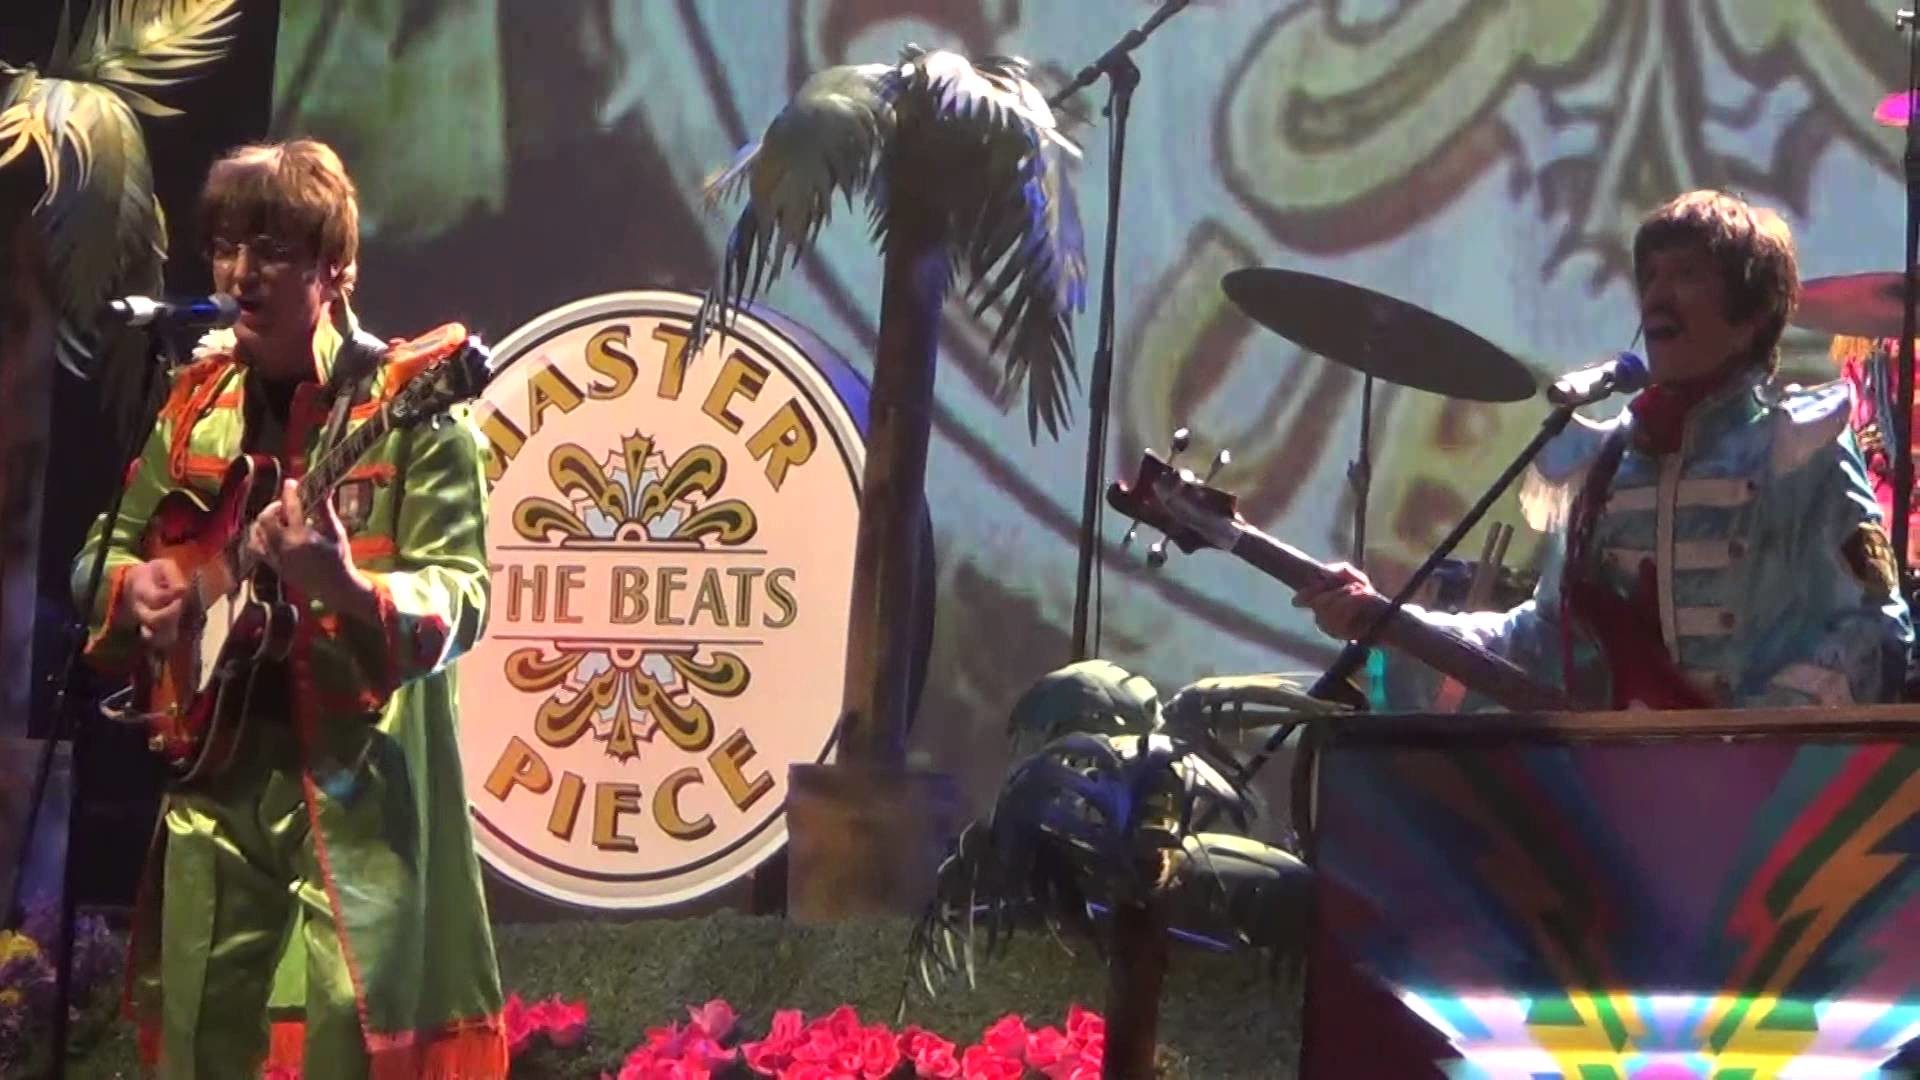 1920x1080 The Beats - Sgt. Pepper's Lonely Hearts Club Band